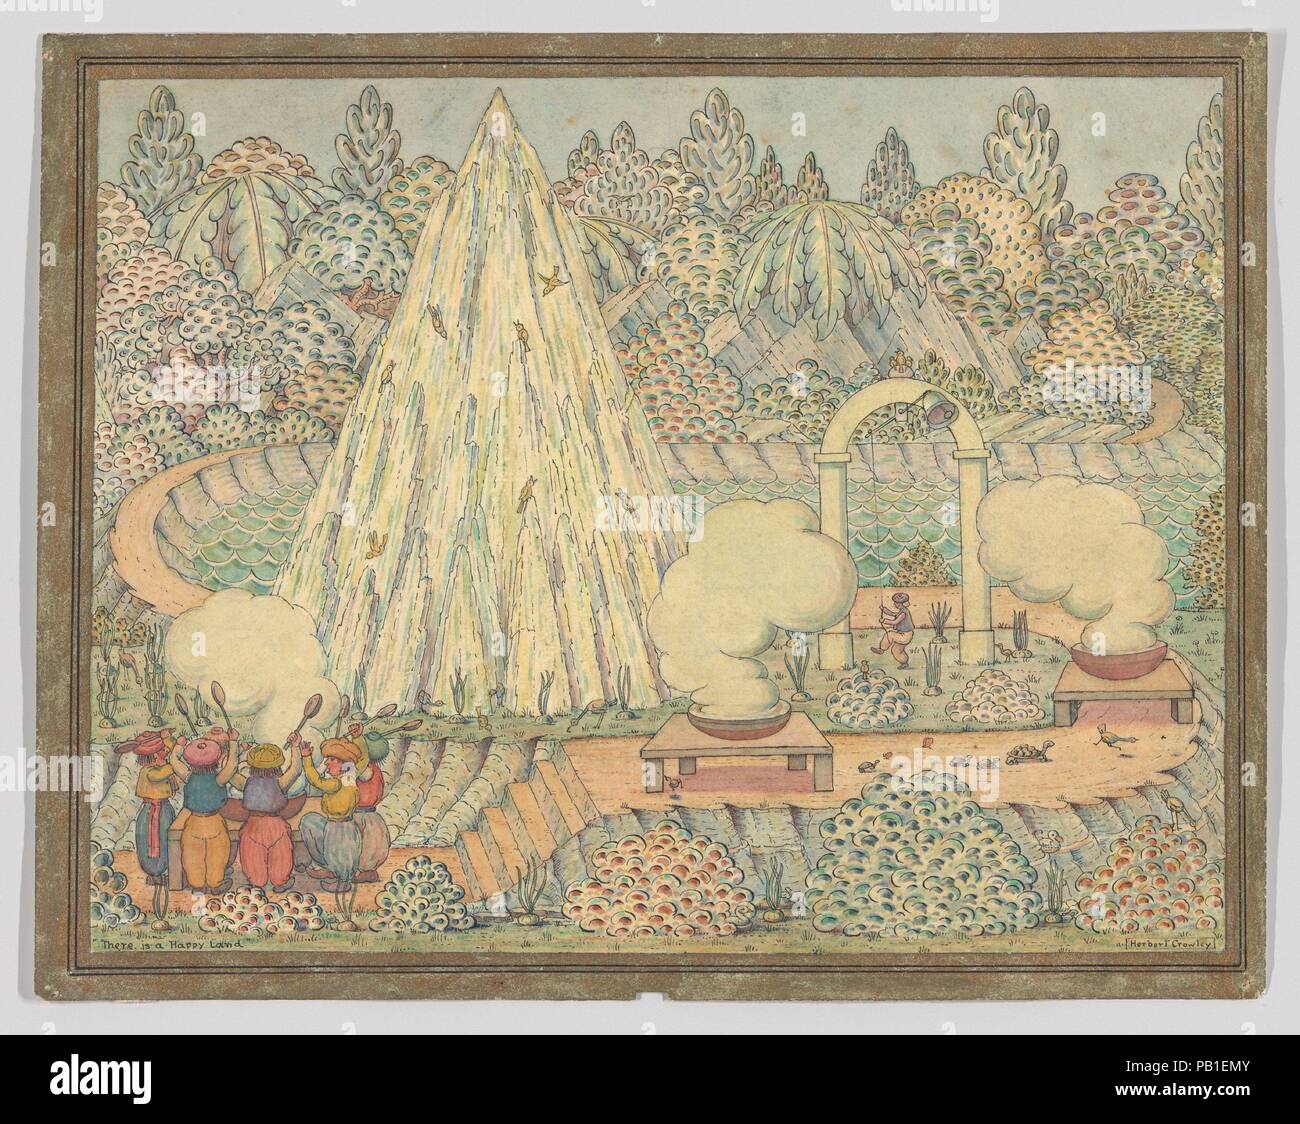 There is a Happy Land, a 'Wiggle Much' design. Artist: Herbert E. Crowley (British, London 1873-1939 Zurich). Dimensions: Sheet: 8 7/8 × 11 5/16 in. (22.5 × 28.7 cm). Date: ca. 1910. Museum: Metropolitan Museum of Art, New York, USA. Stock Photo